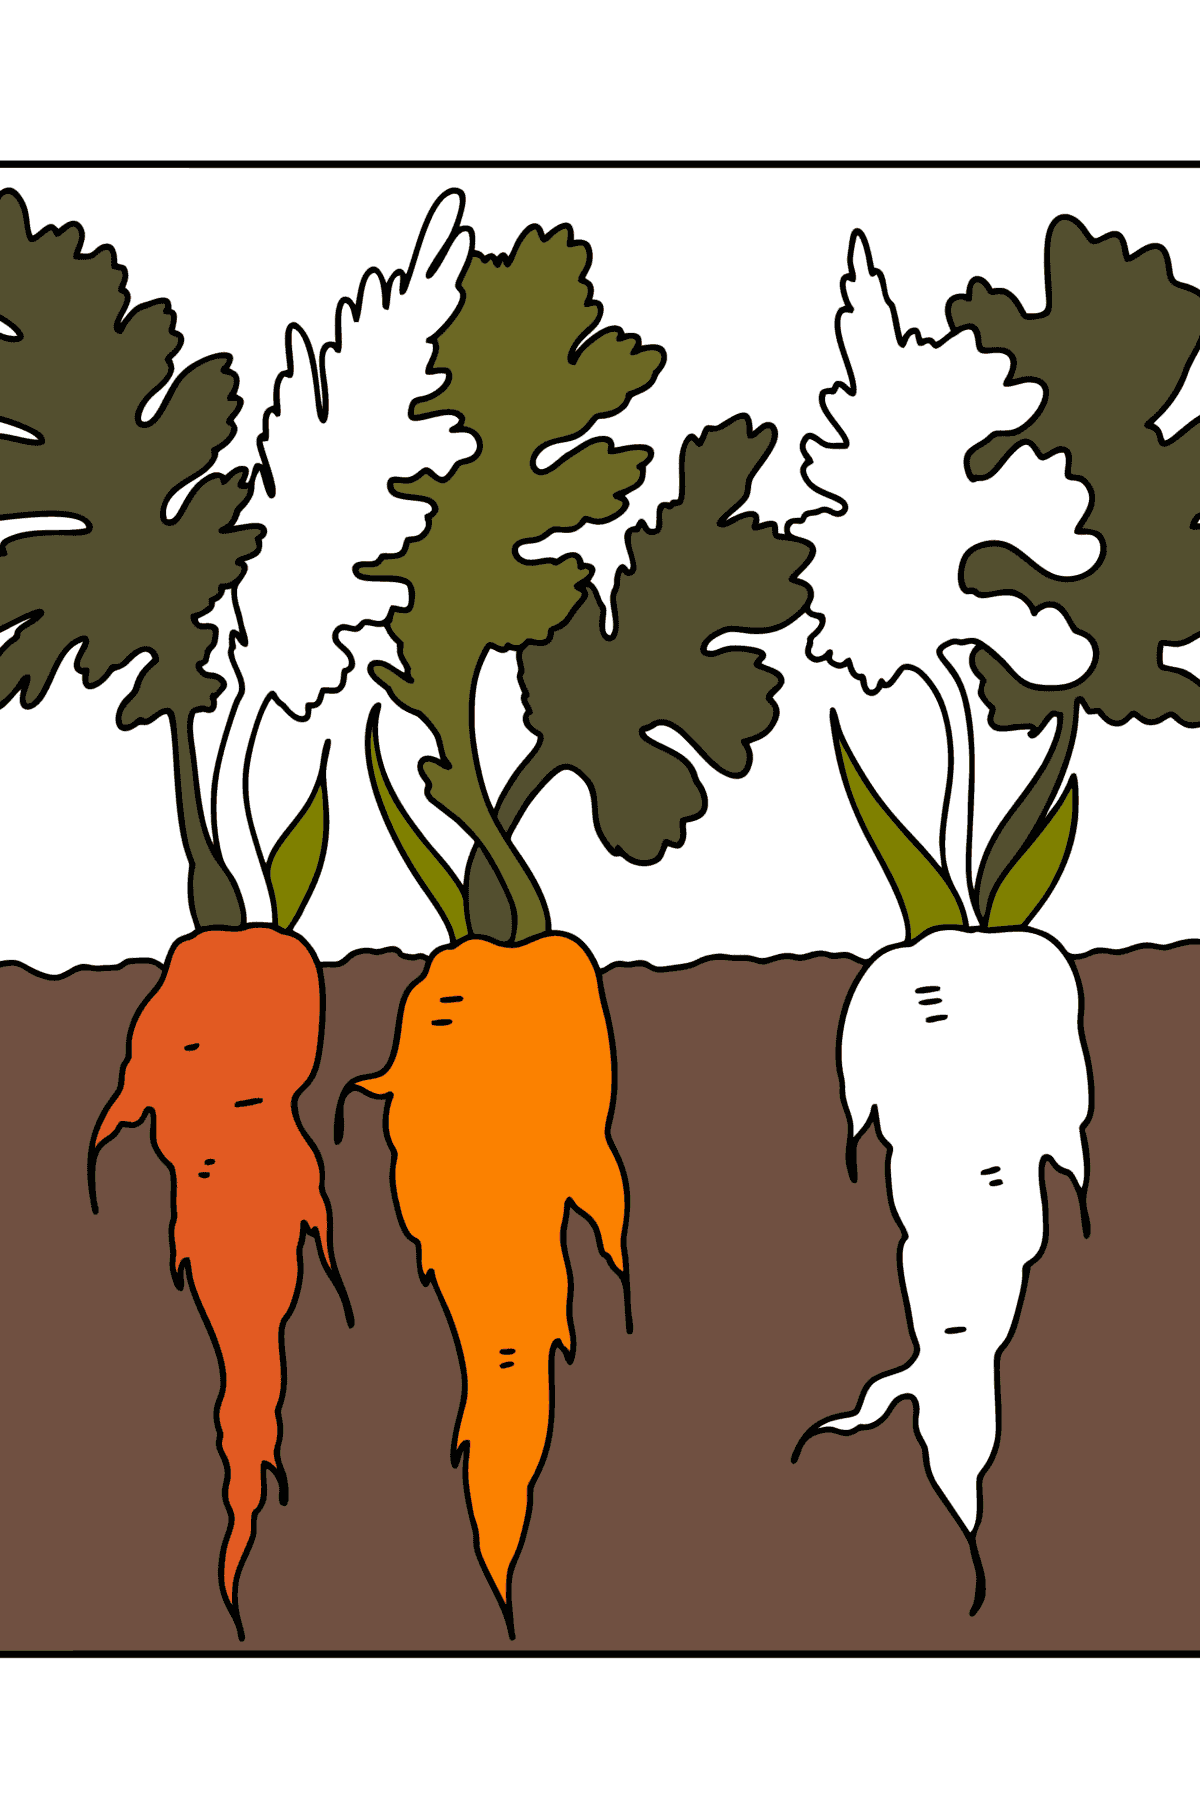 Carrot grows сoloring page - Coloring Pages for Kids